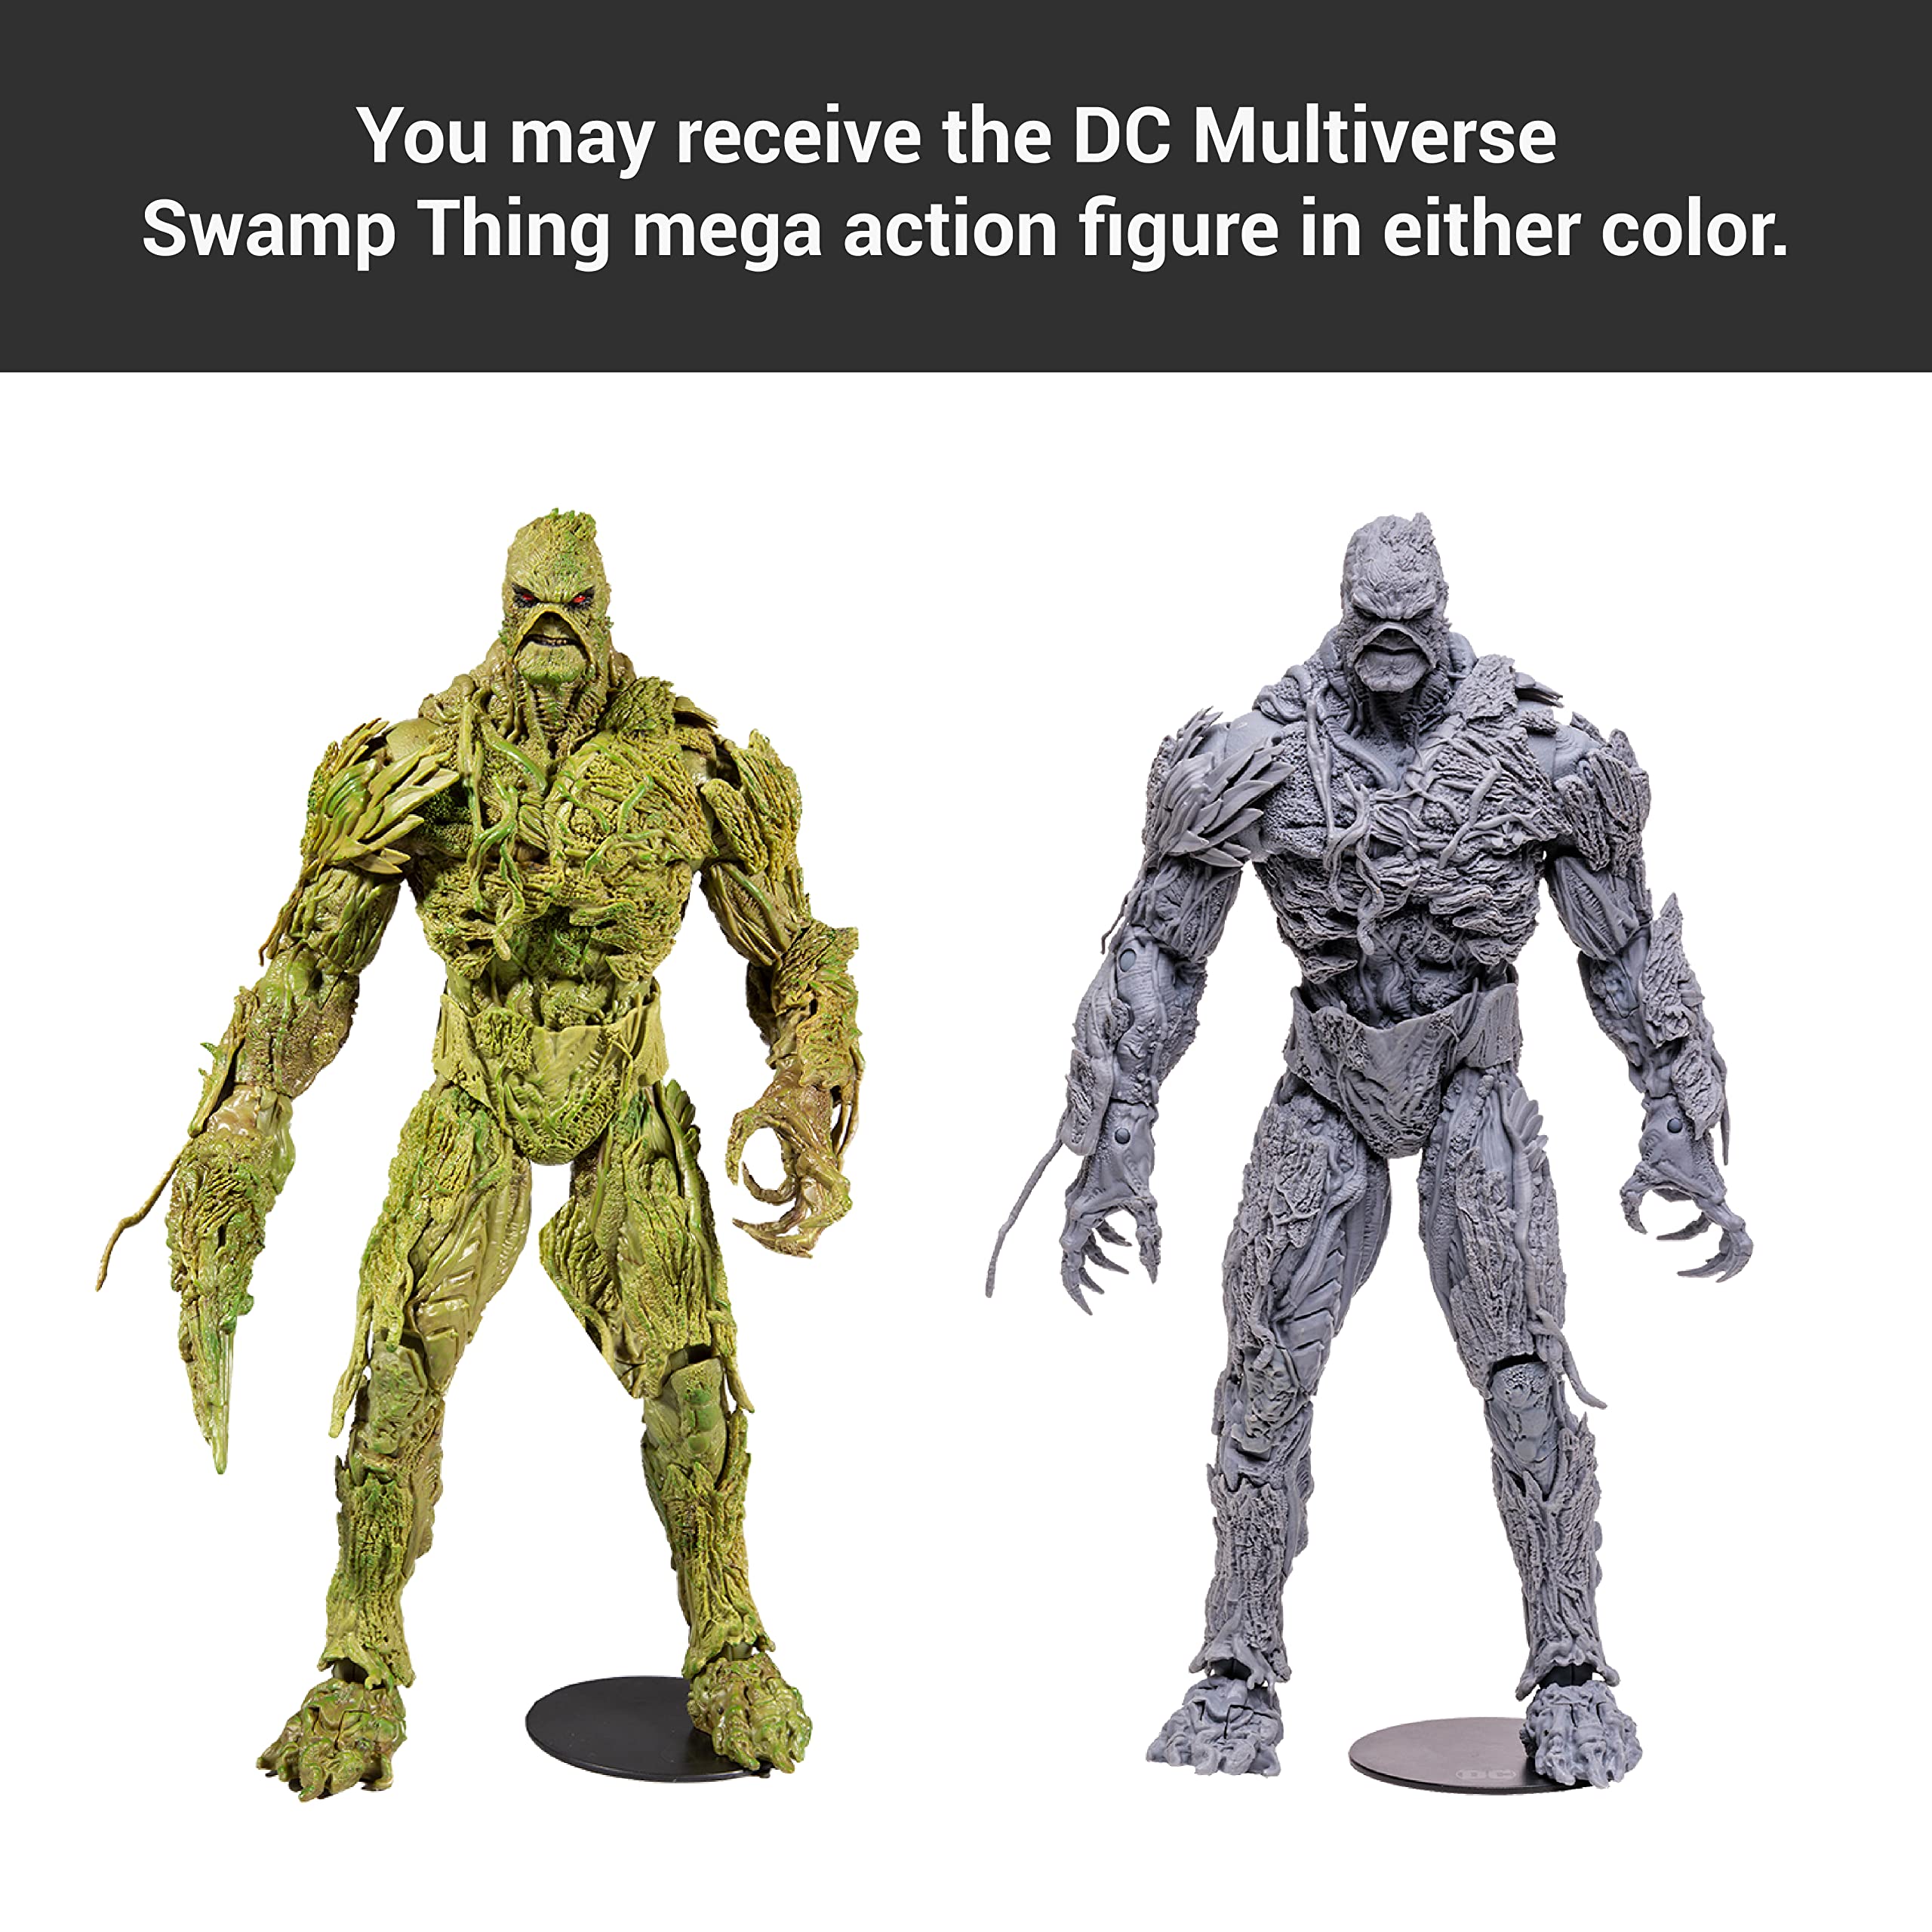 McFarlane Toys - DC Multiverse Swamp Thing Mega Action Figure with Accessories (Figure Style May Vary)